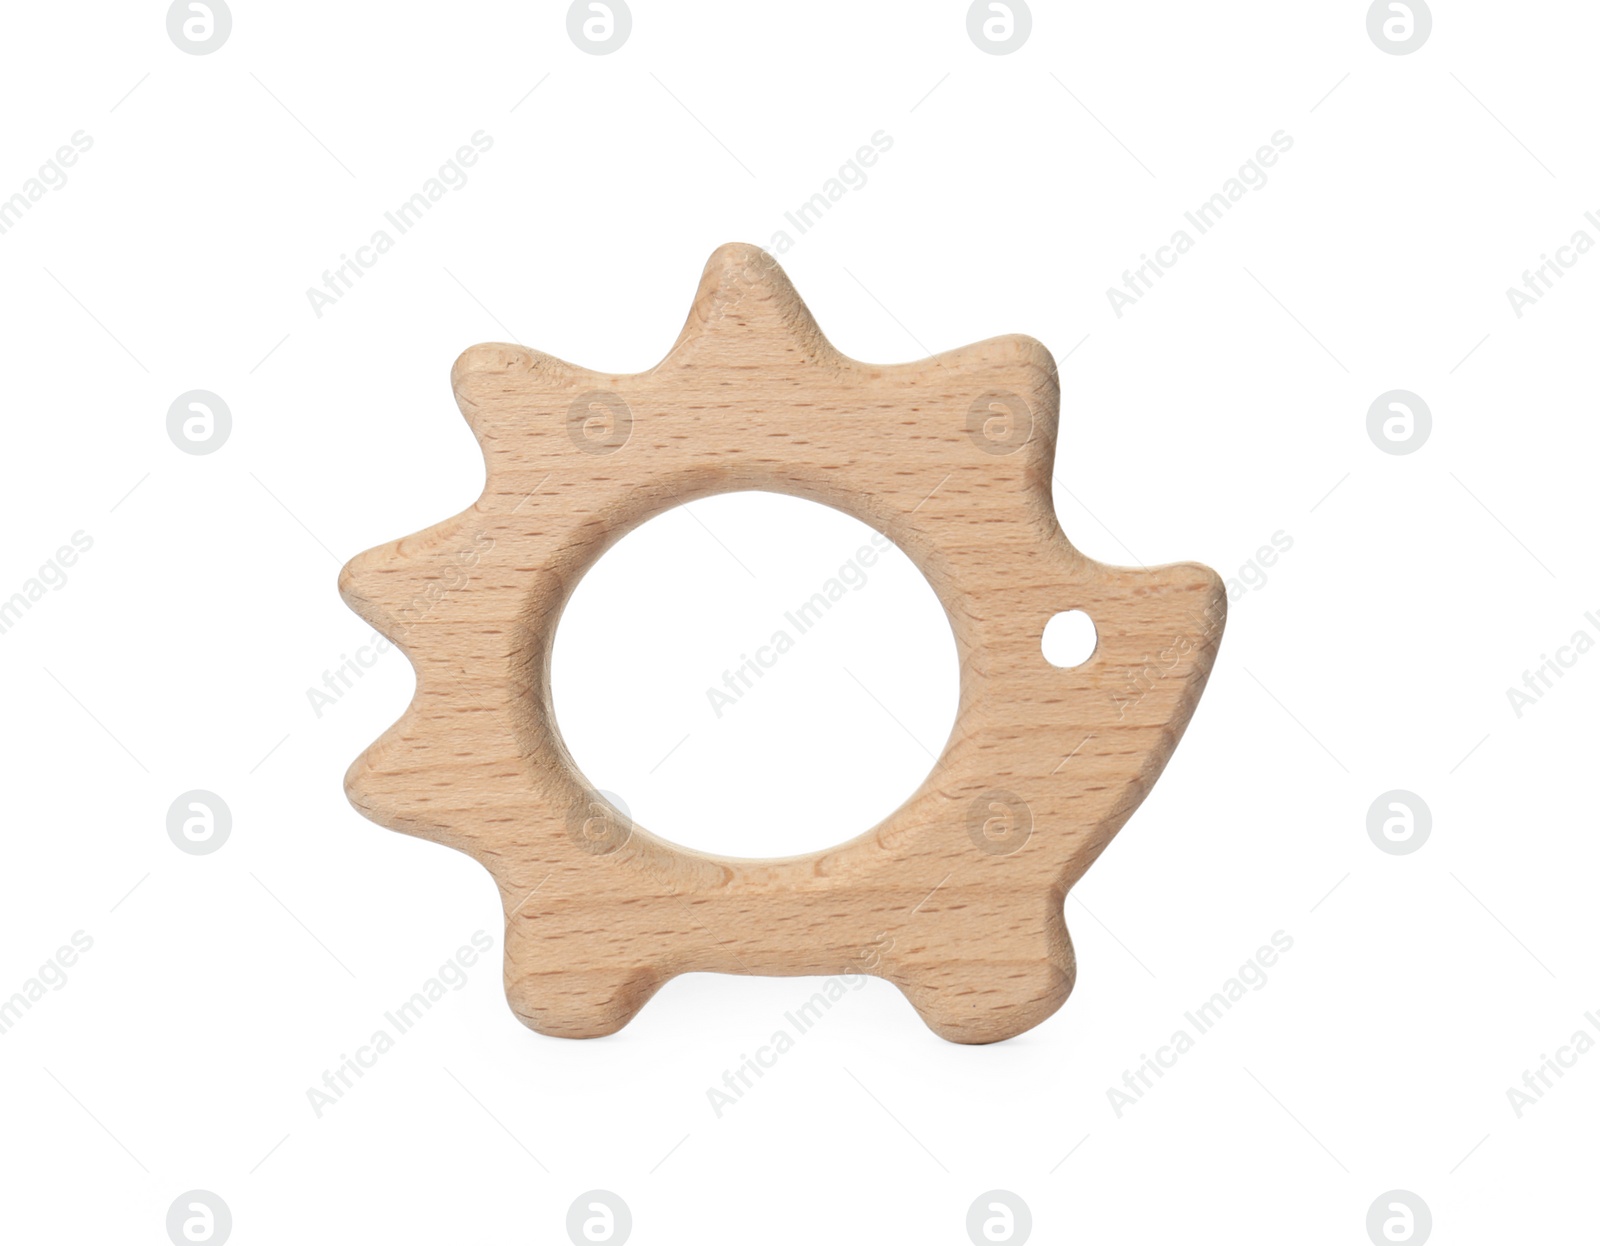 Photo of One wooden toy hedgehog for children isolated on white